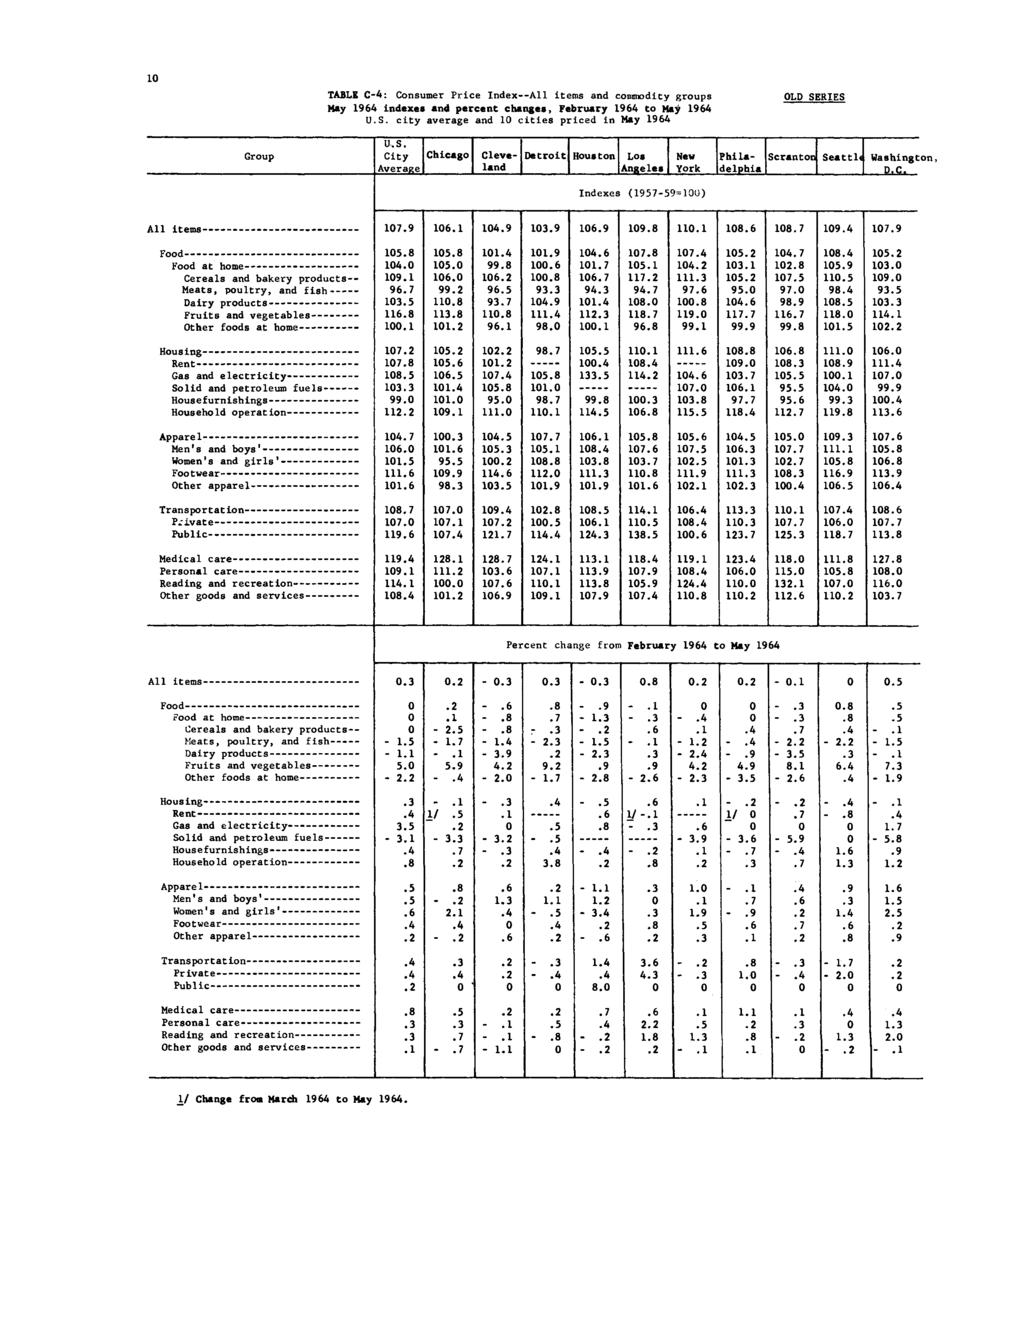 1 TABLE C-4: Consumer Price Index All items and commodity groups indexes and percent changes, February to U.S.